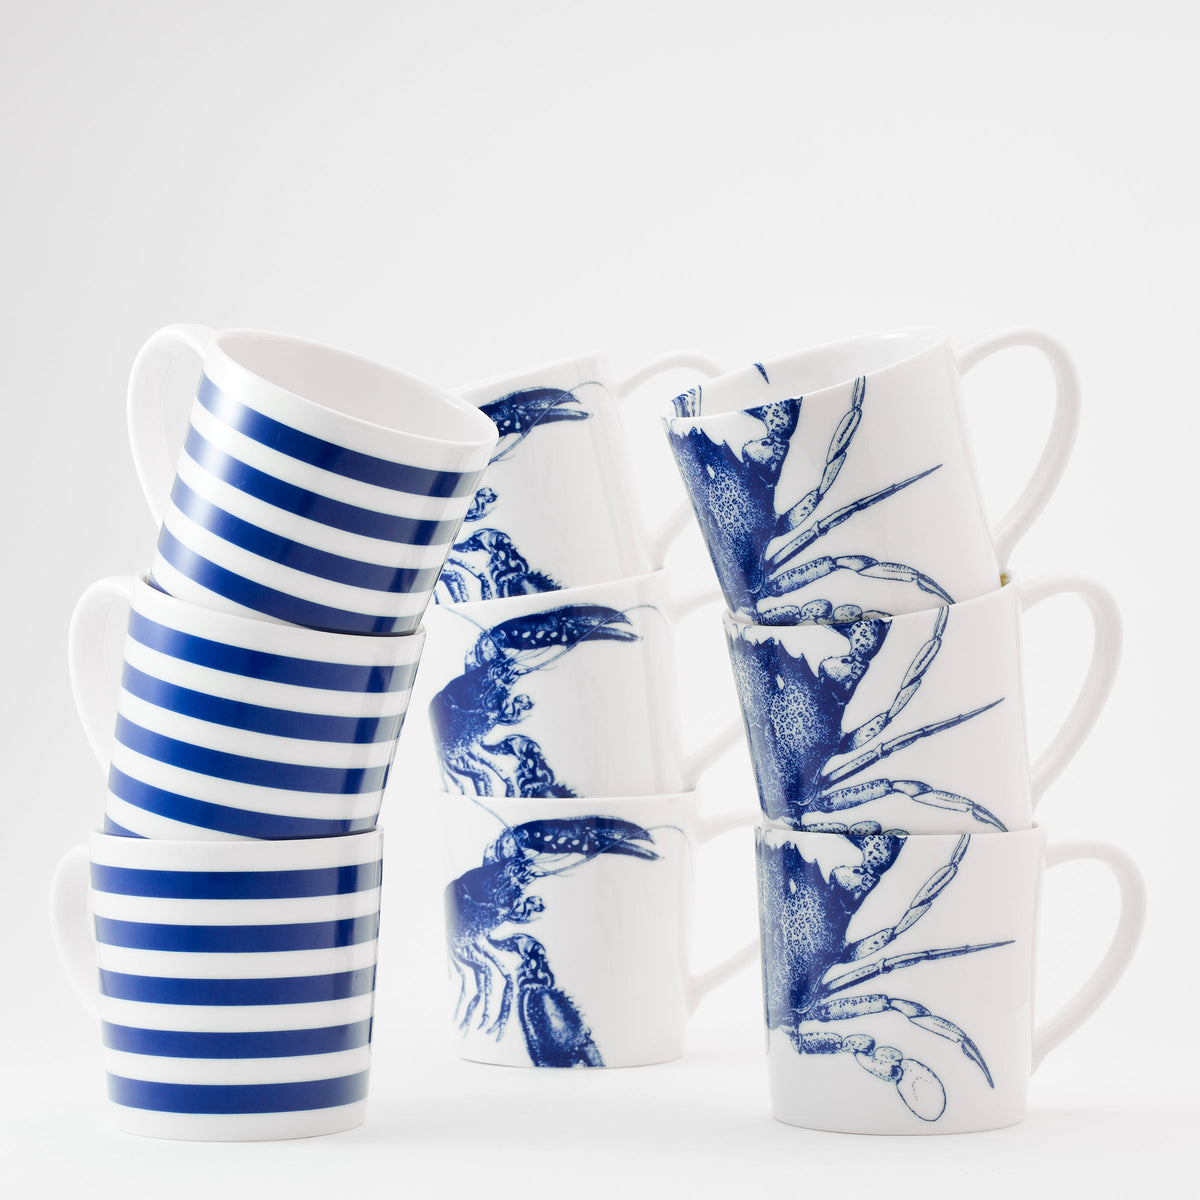 Two stacks of ceramic mugs are shown. One stack has blue and white stripes, while the other features blue crab illustrations on a white background. These Lobster Mugs by Caskata Artisanal Home are made in Sri Lanka.